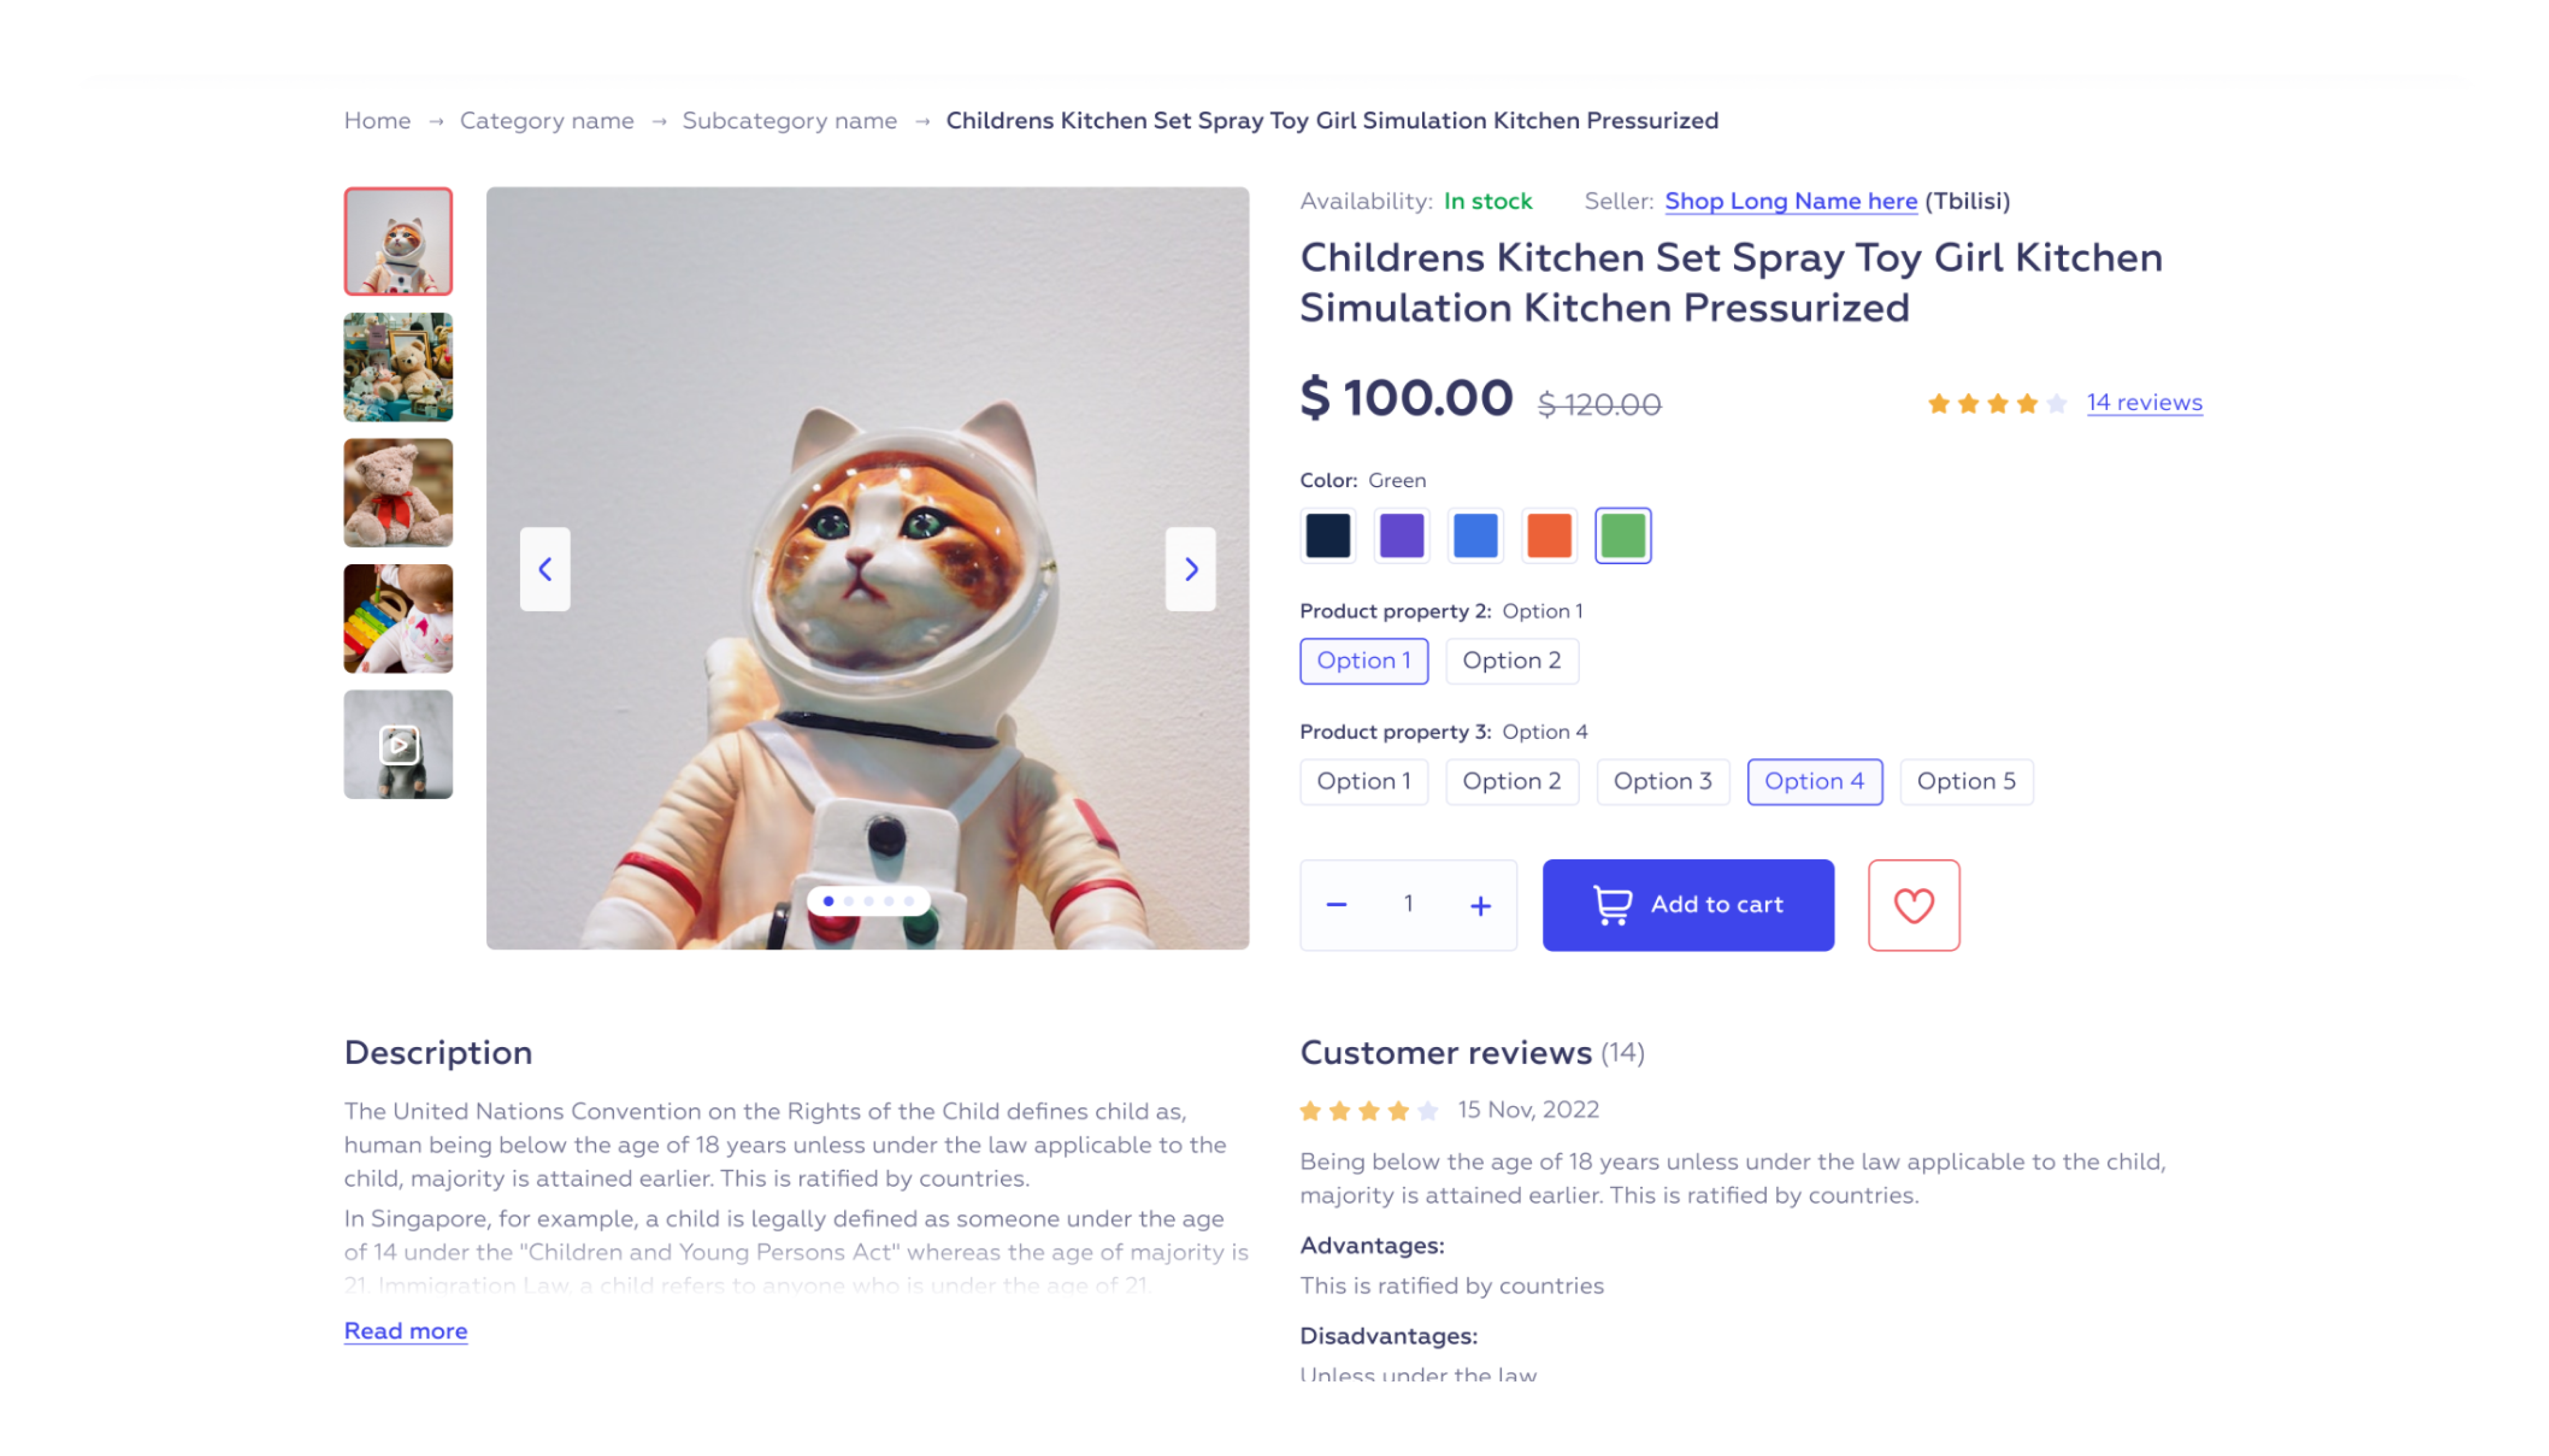 Kiddo Product page